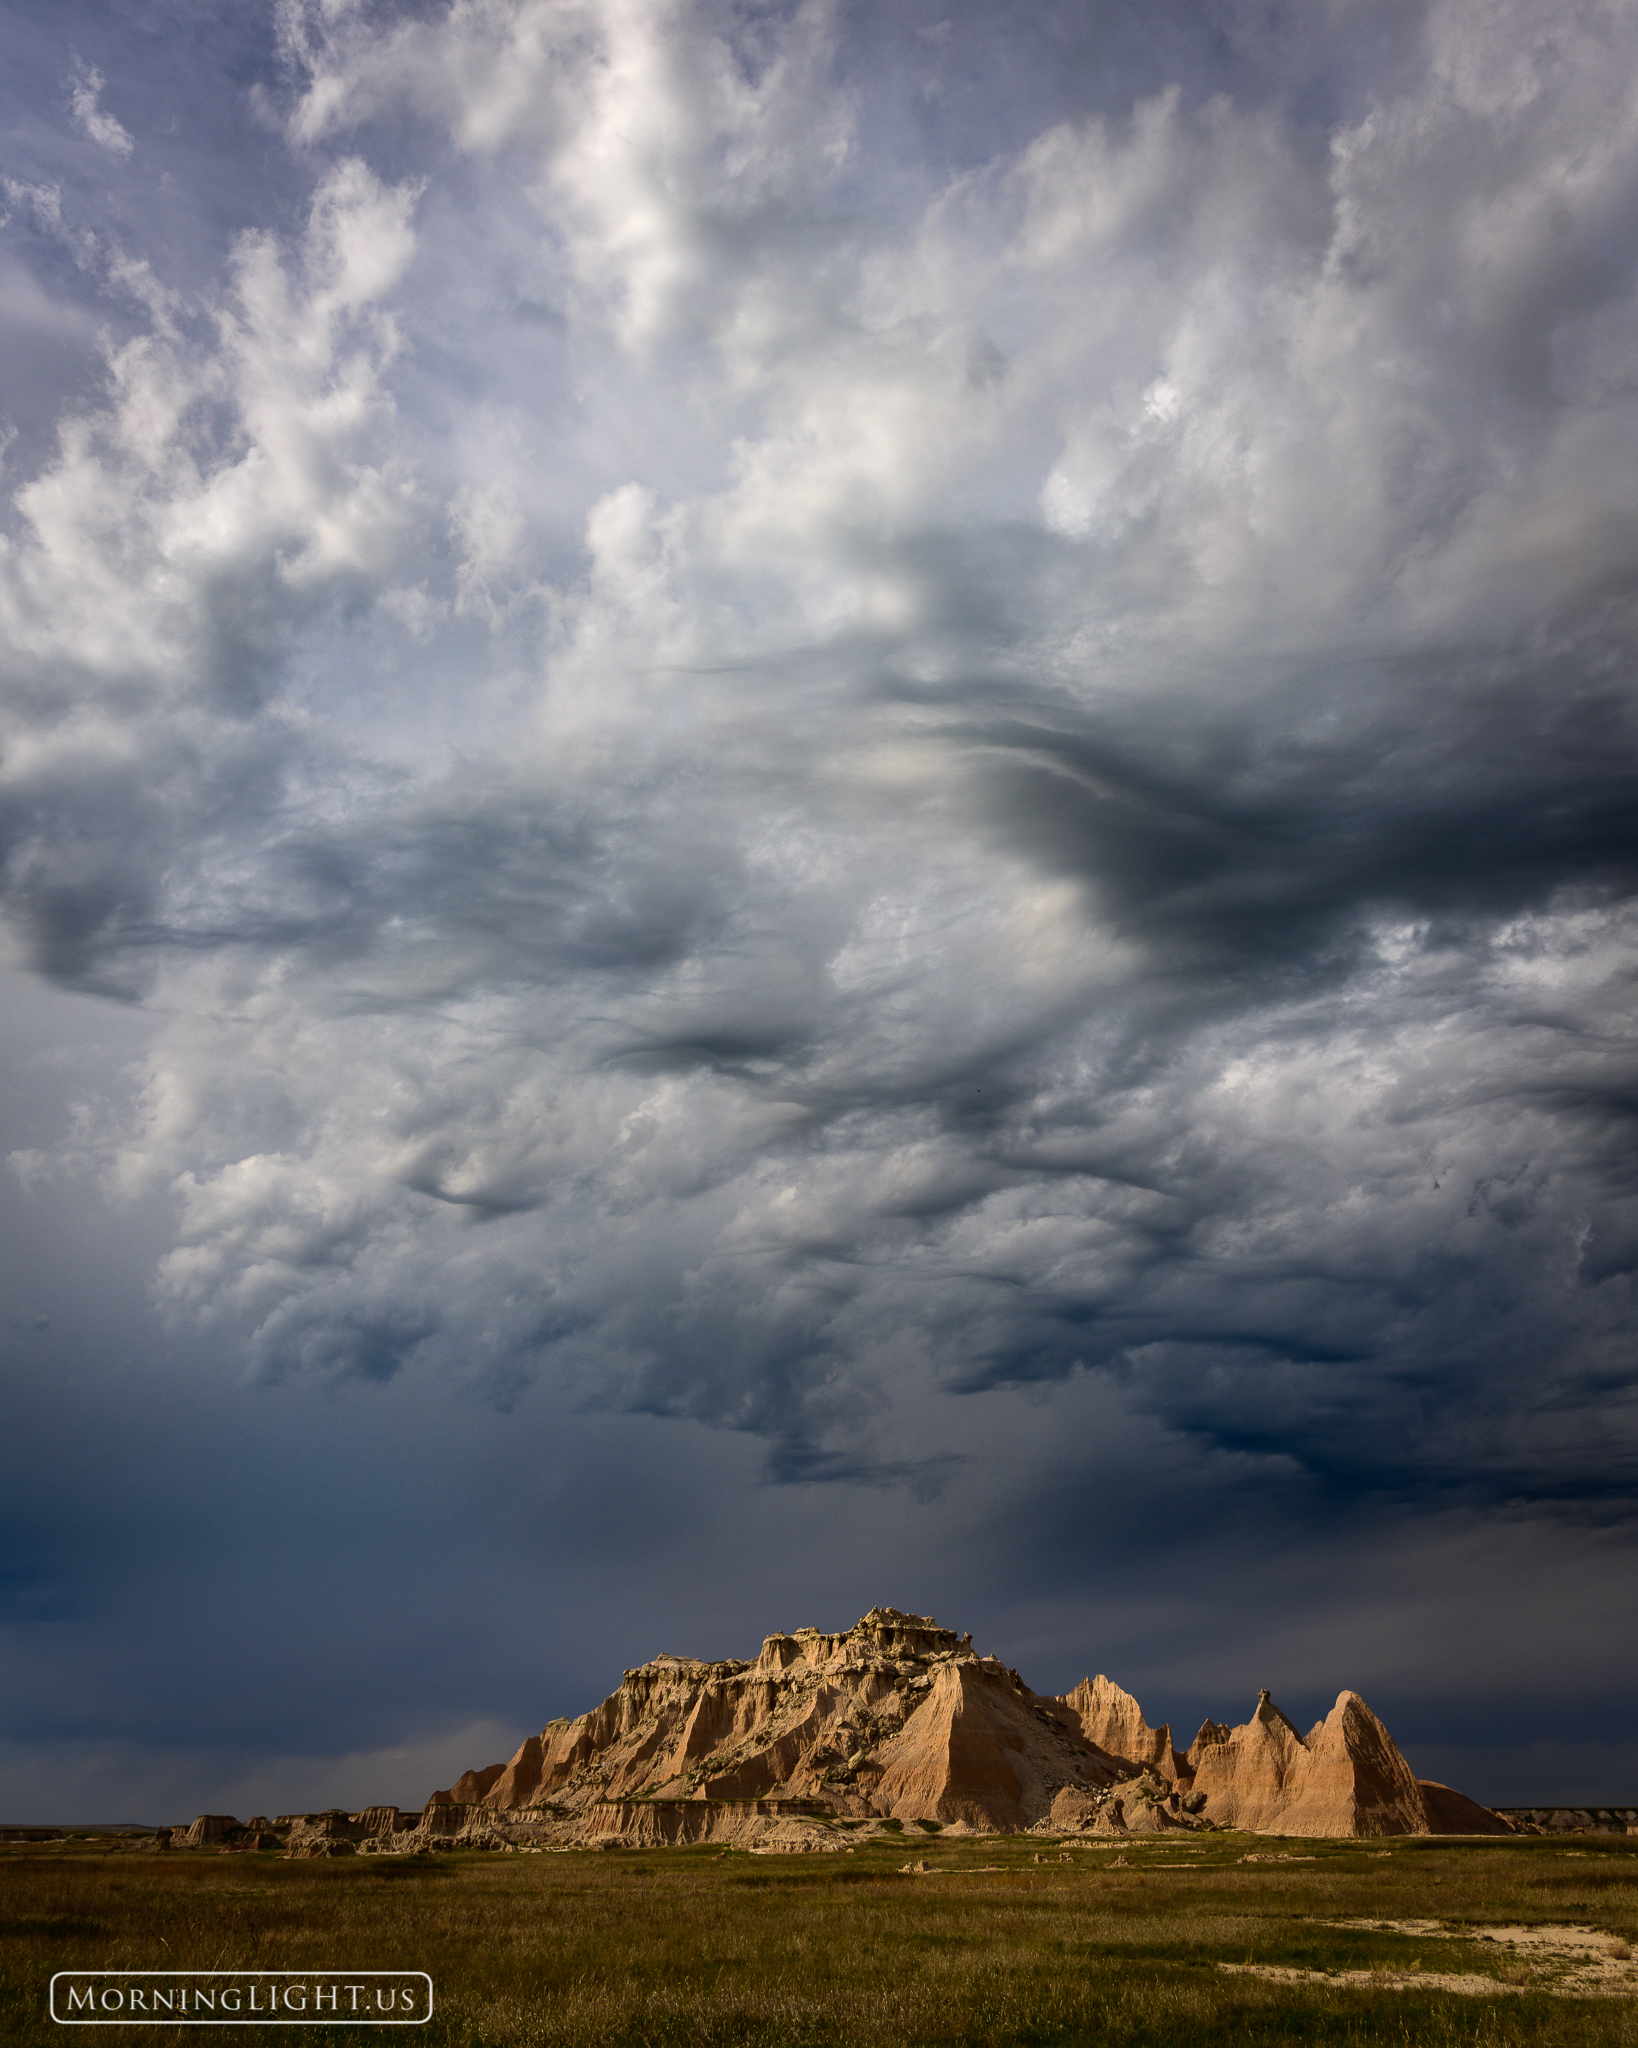 A thunderstorm builds over the South Dakota Badlands promising a deluge of rain on this rugged land.